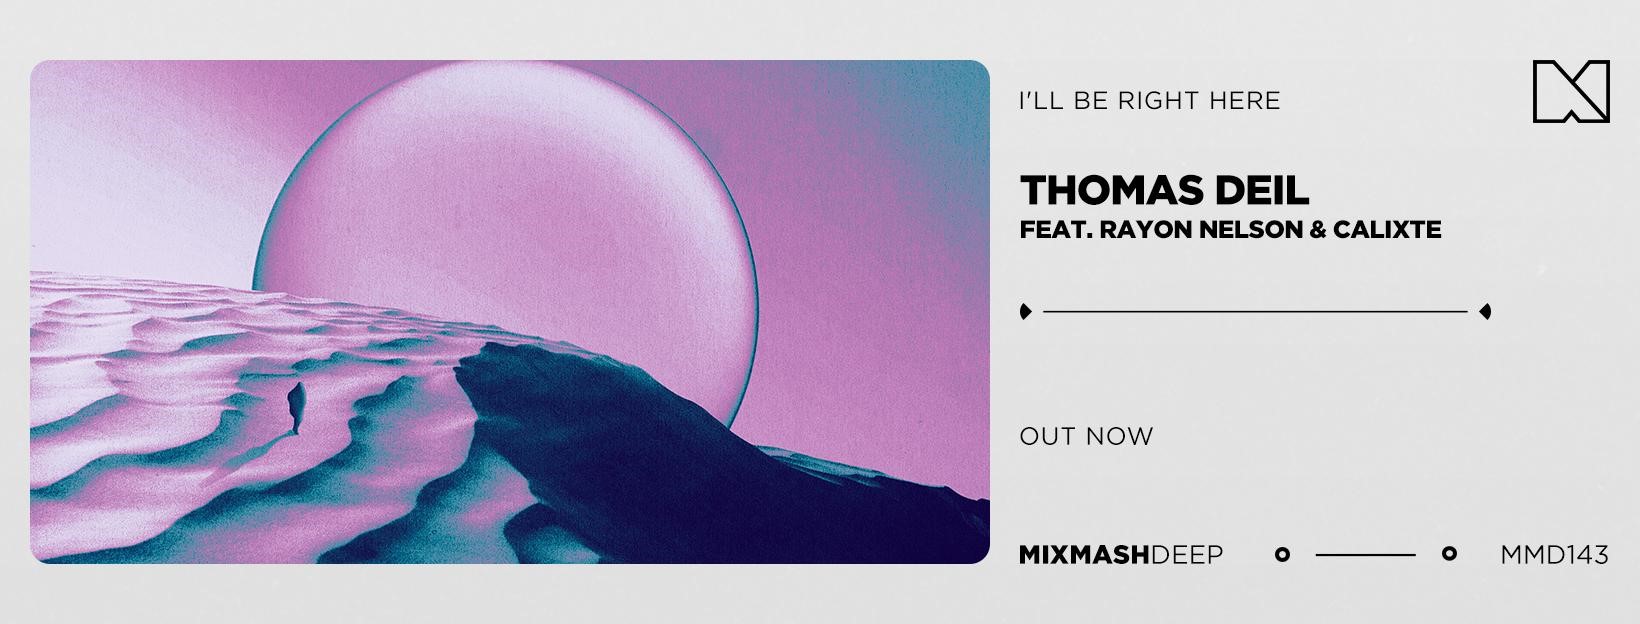 I’ll Be Right Here by Thomas Deil is the new release